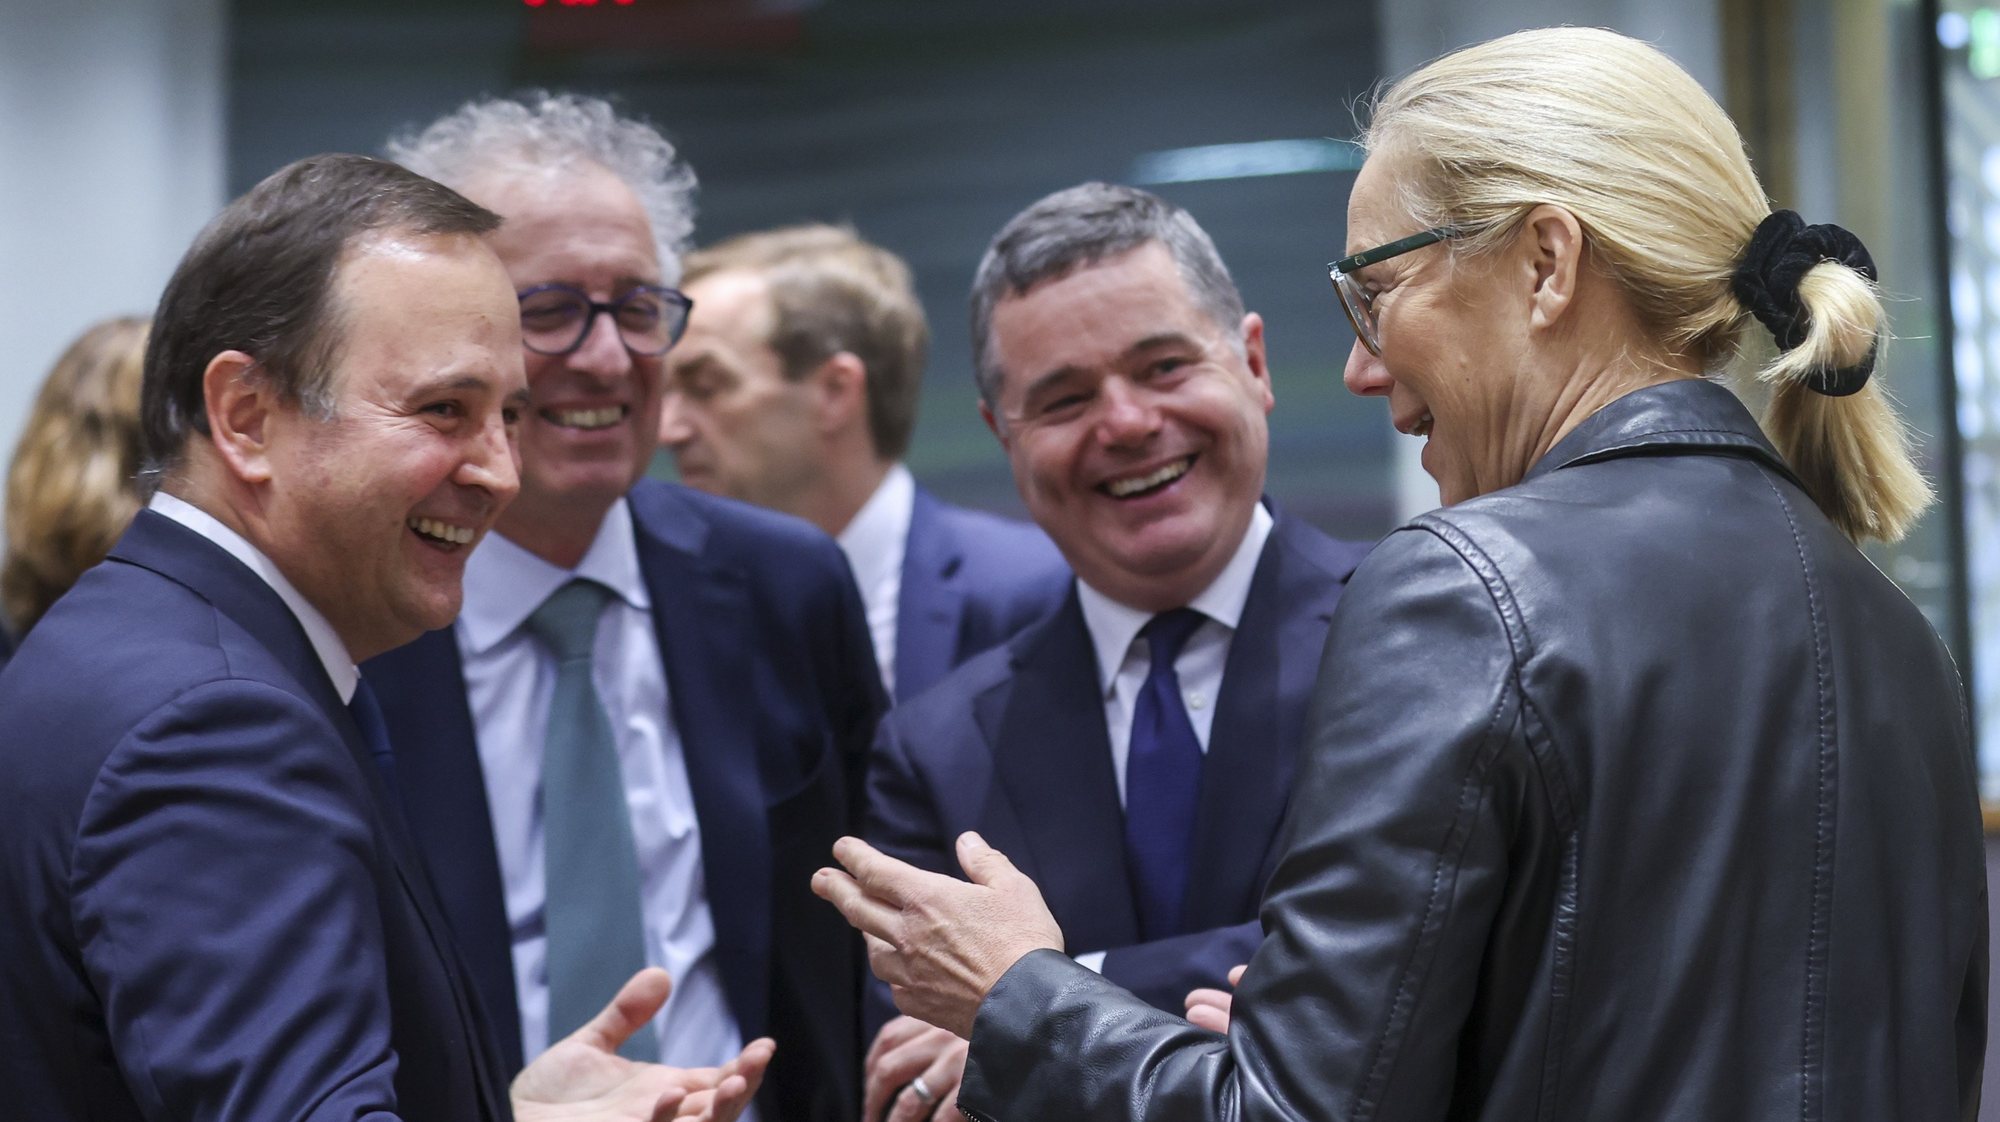 epa11015723 (L-R) Portuguese Minister of Finance Fernando Medina, European stability mechanism ESM Managing Director Pierre Gramegna, the President of the Eurogroup Paschal Donohoe and Dutch Finance Minister Sigrid Kaag  chat prior to the start of the  Eurogroup finance ministers meeting in Brussels, Belgium, 07 December 2023. The Eurogroup will discuss the overall budgetary situation and prospects in the euro area and review the economic and fiscal situation of the euro area member states.  EPA/OLIVIER HOSLET